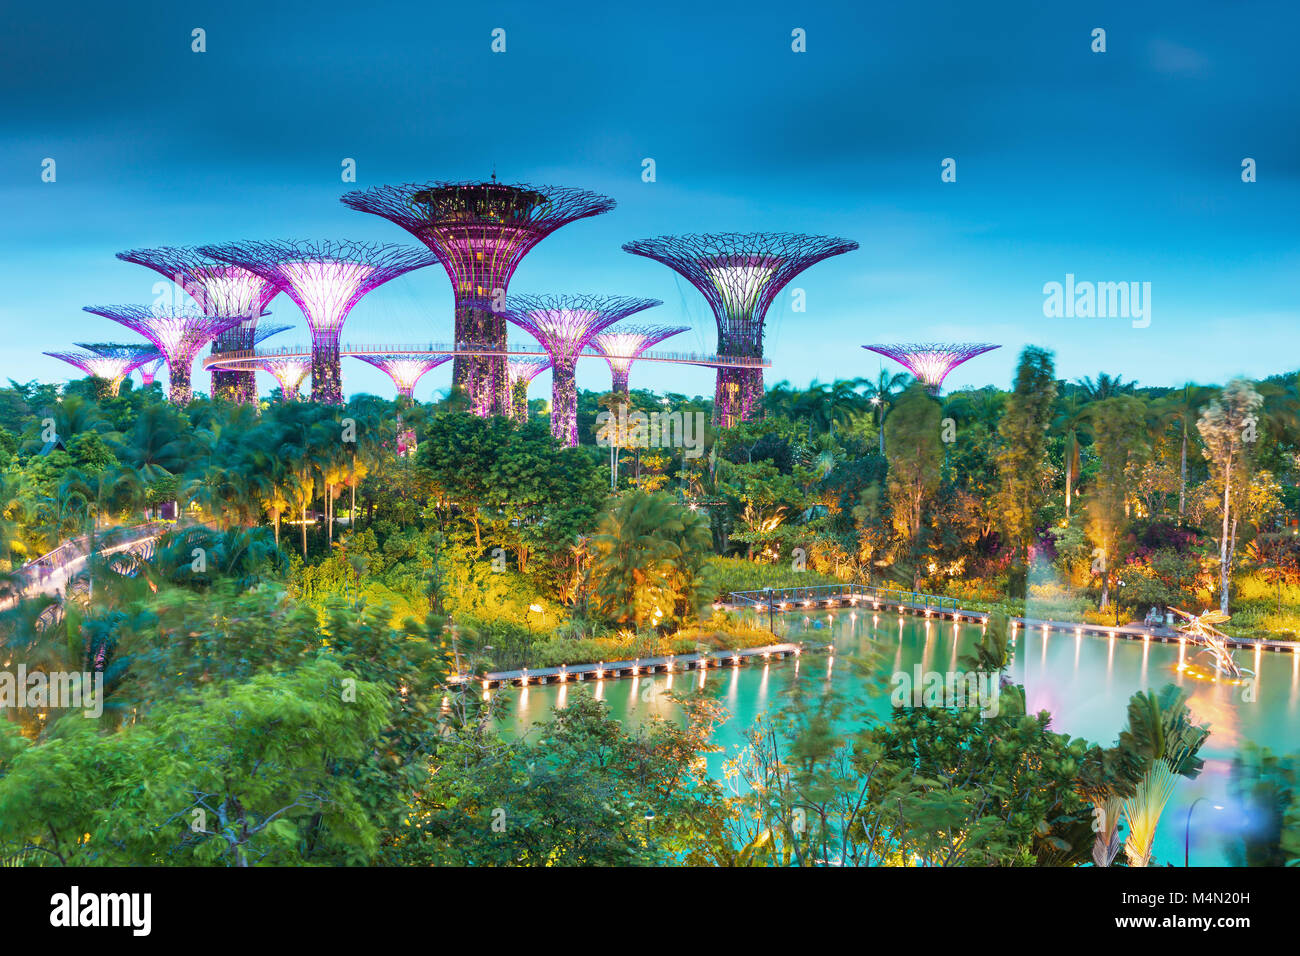 Supertrees at Gardens by the Bay. The tree  structures are fitted with environmental technologies,Singapore Stock Photo